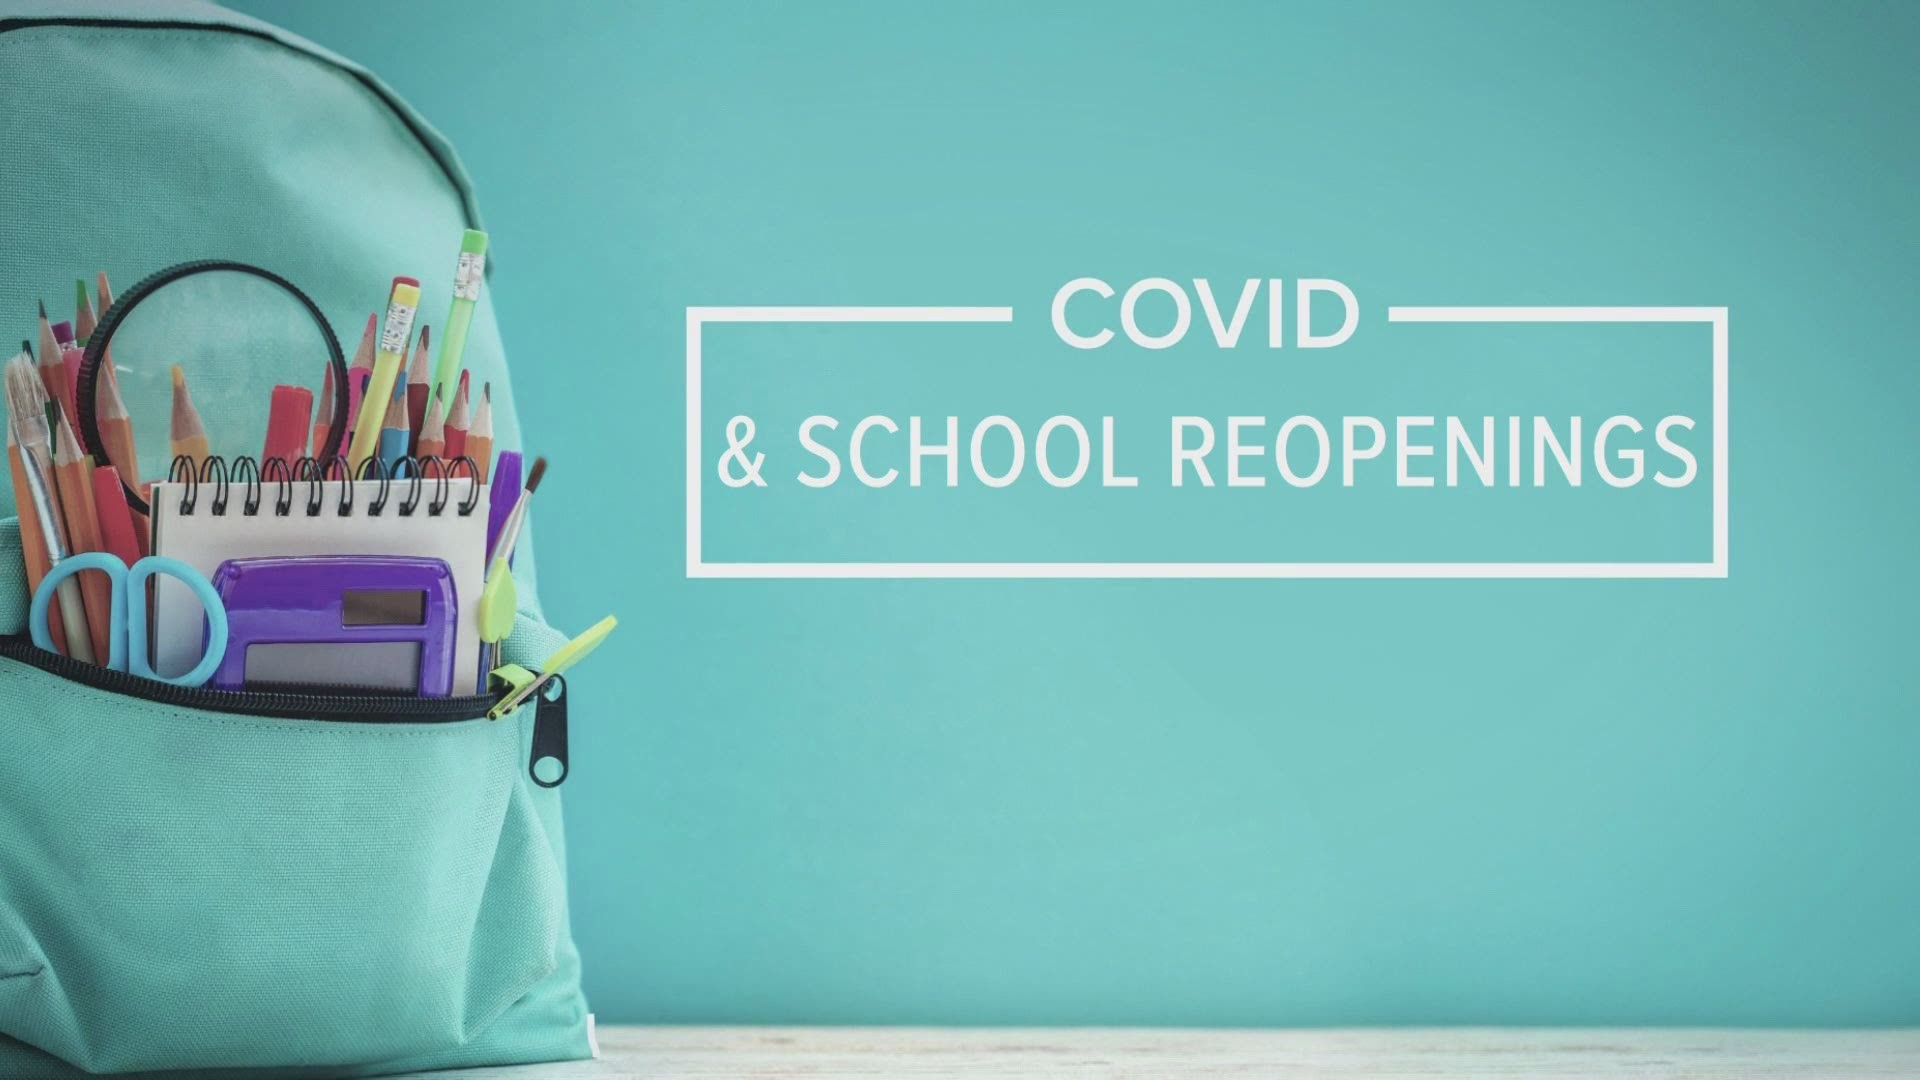 Students are adjusting and learning while returning to school part-time due to COVID-19 coronavirus